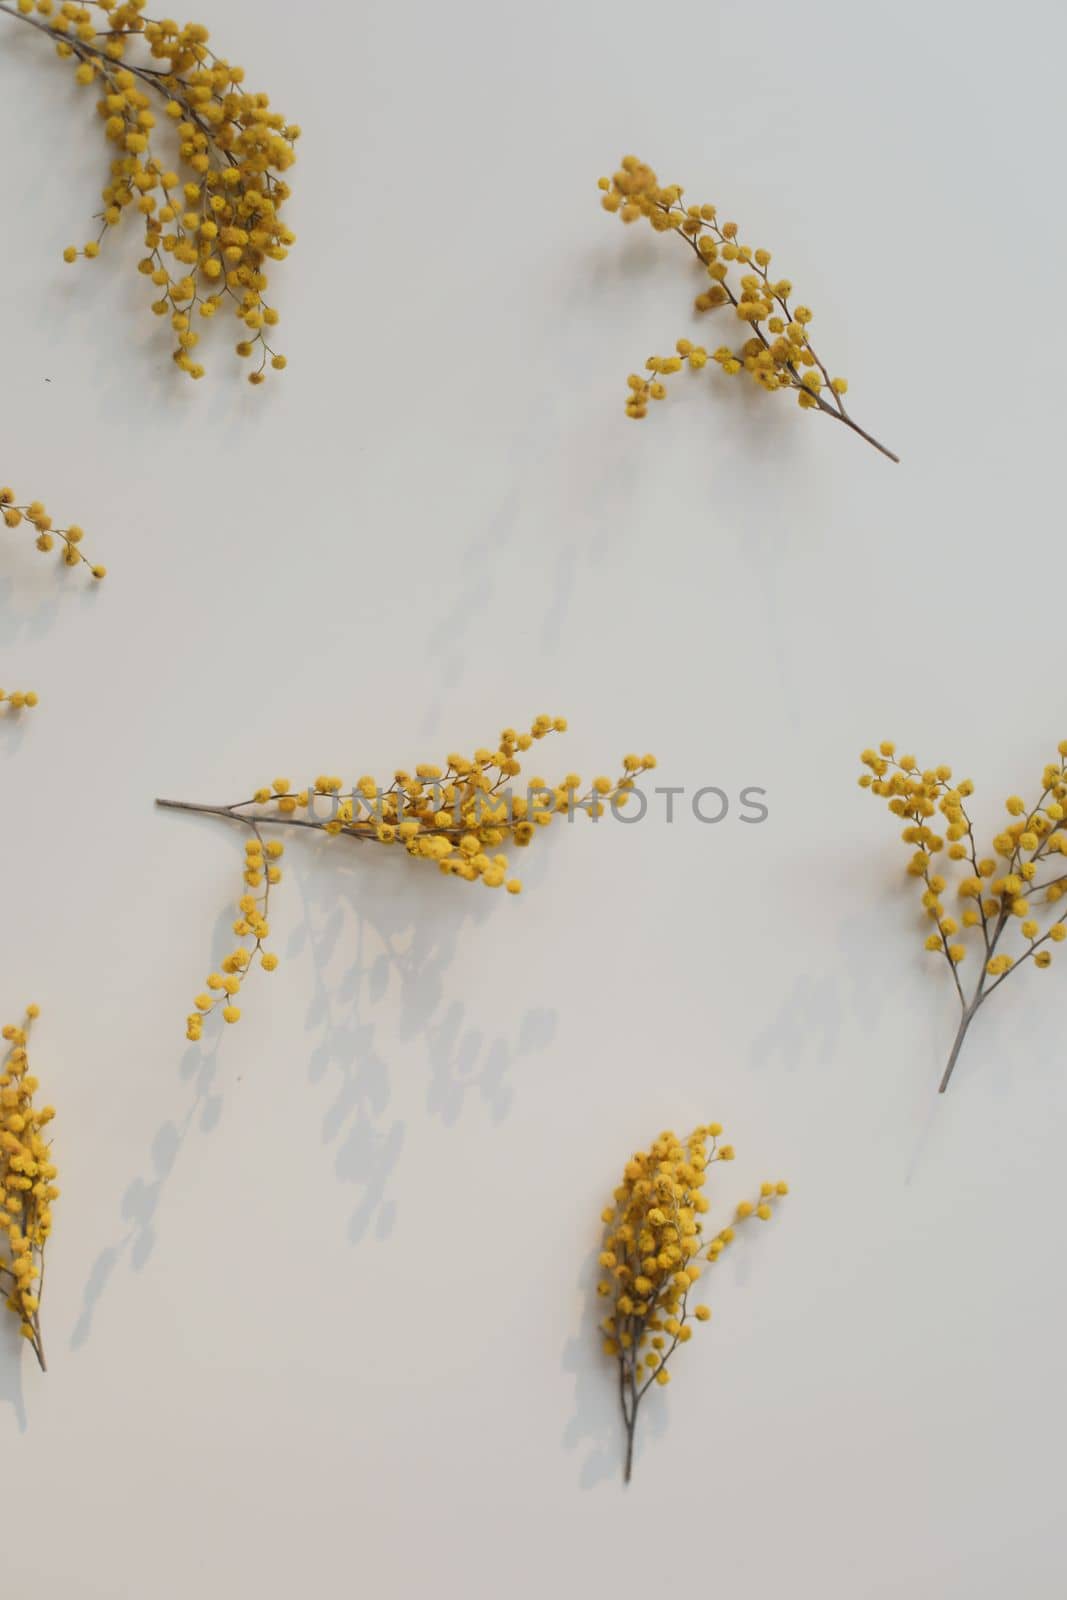 floral pattern of mimosa flowers on white backdrop. Copy space. Floral frame. High quality photo